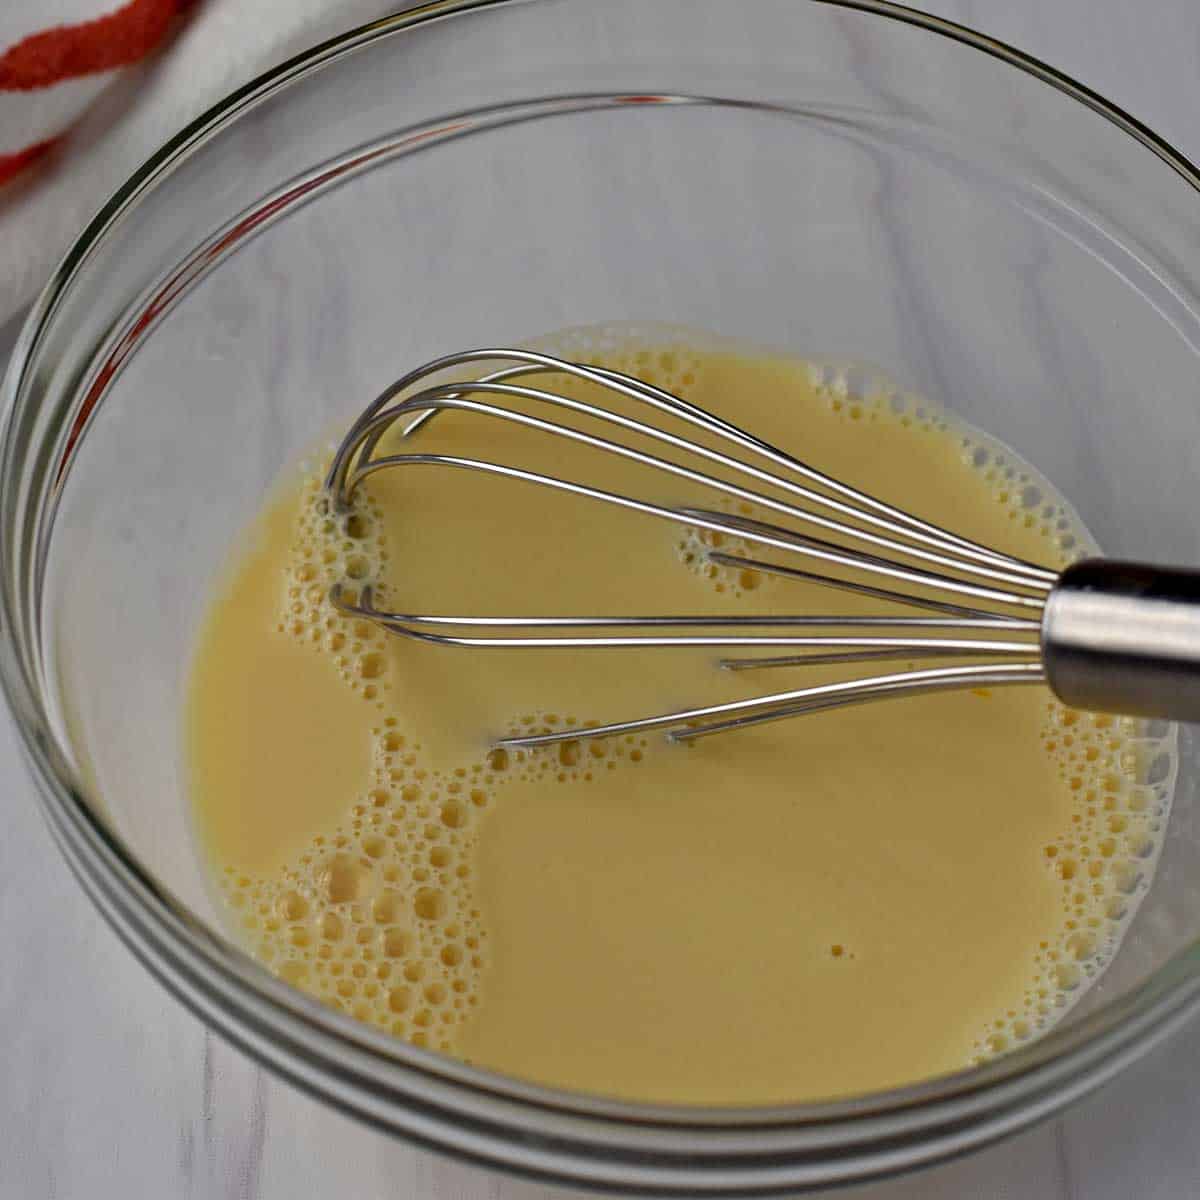 Wet ingredients for apple fritters whisked together with a wire whisk in a glass mixing bowl.